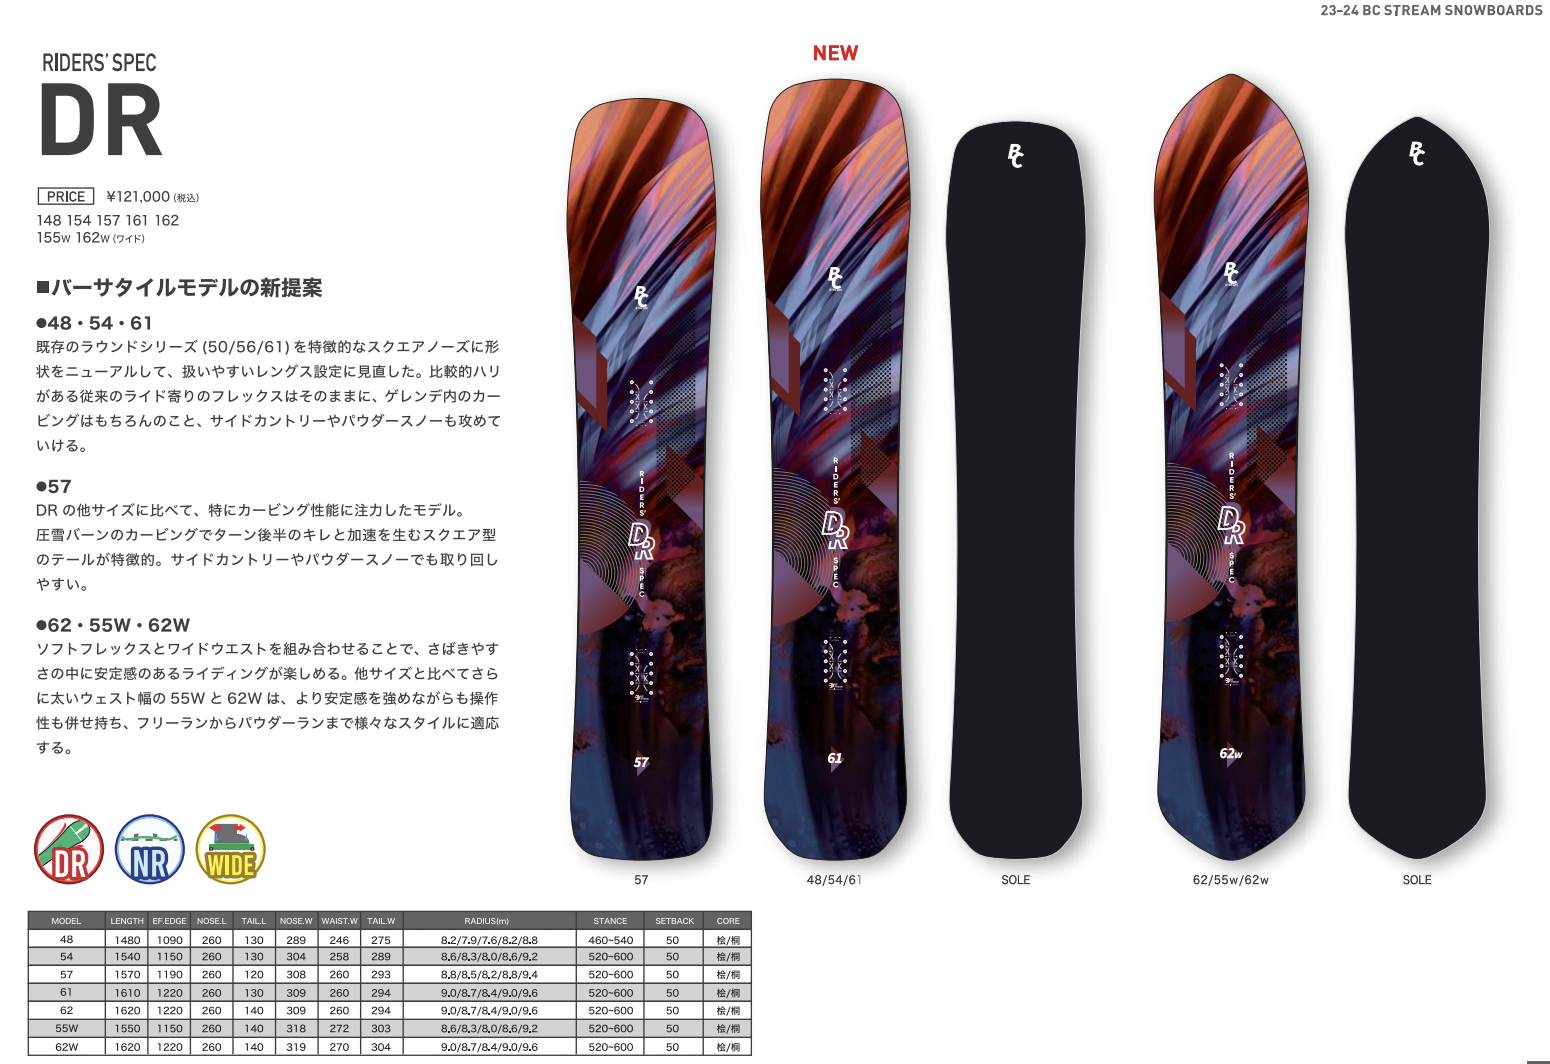 BC-STREAM 【RIDERS' SPEC DR 155W , 162 , 162W】平間和徳・開発モデル - JOINT HOUSE